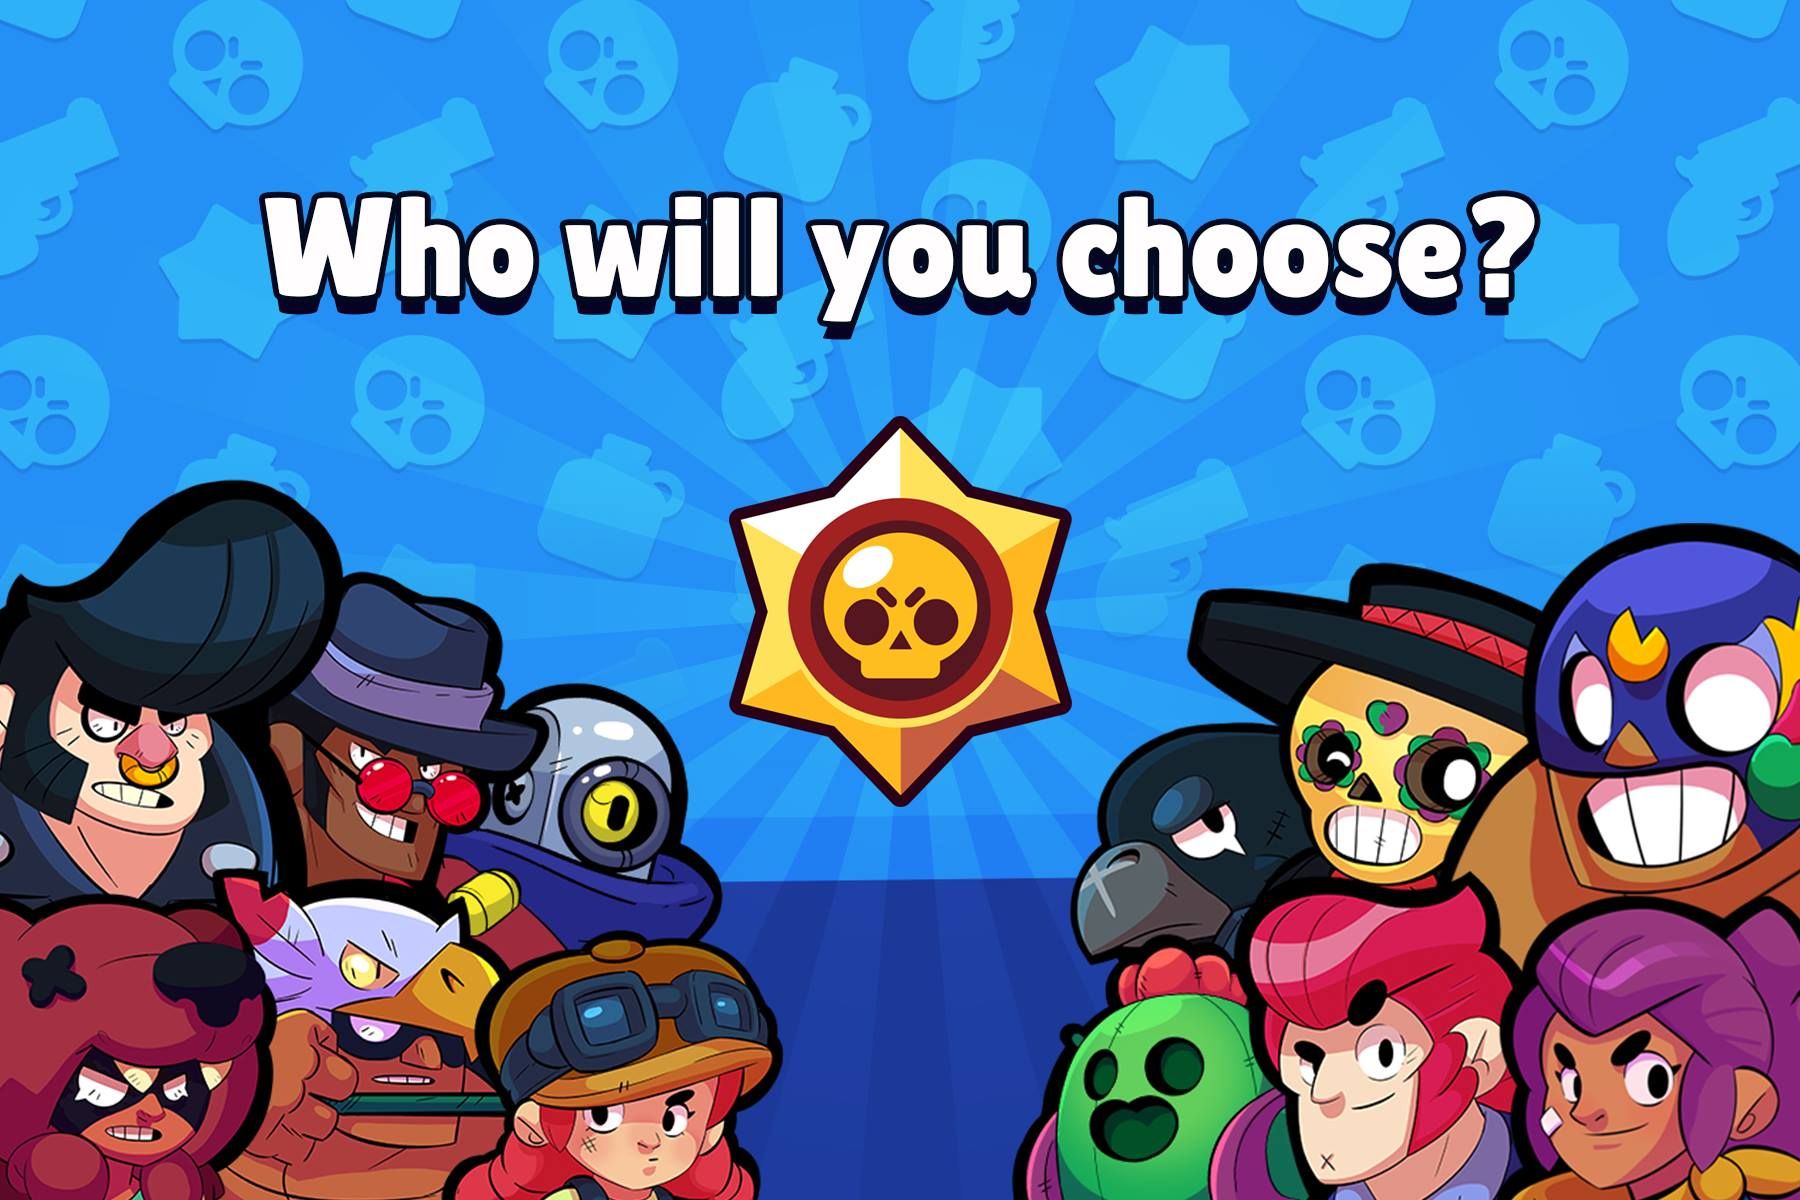 Clash Of Clans Developer Supercell Reveals New Game Brawl Stars - brawl star game supercell